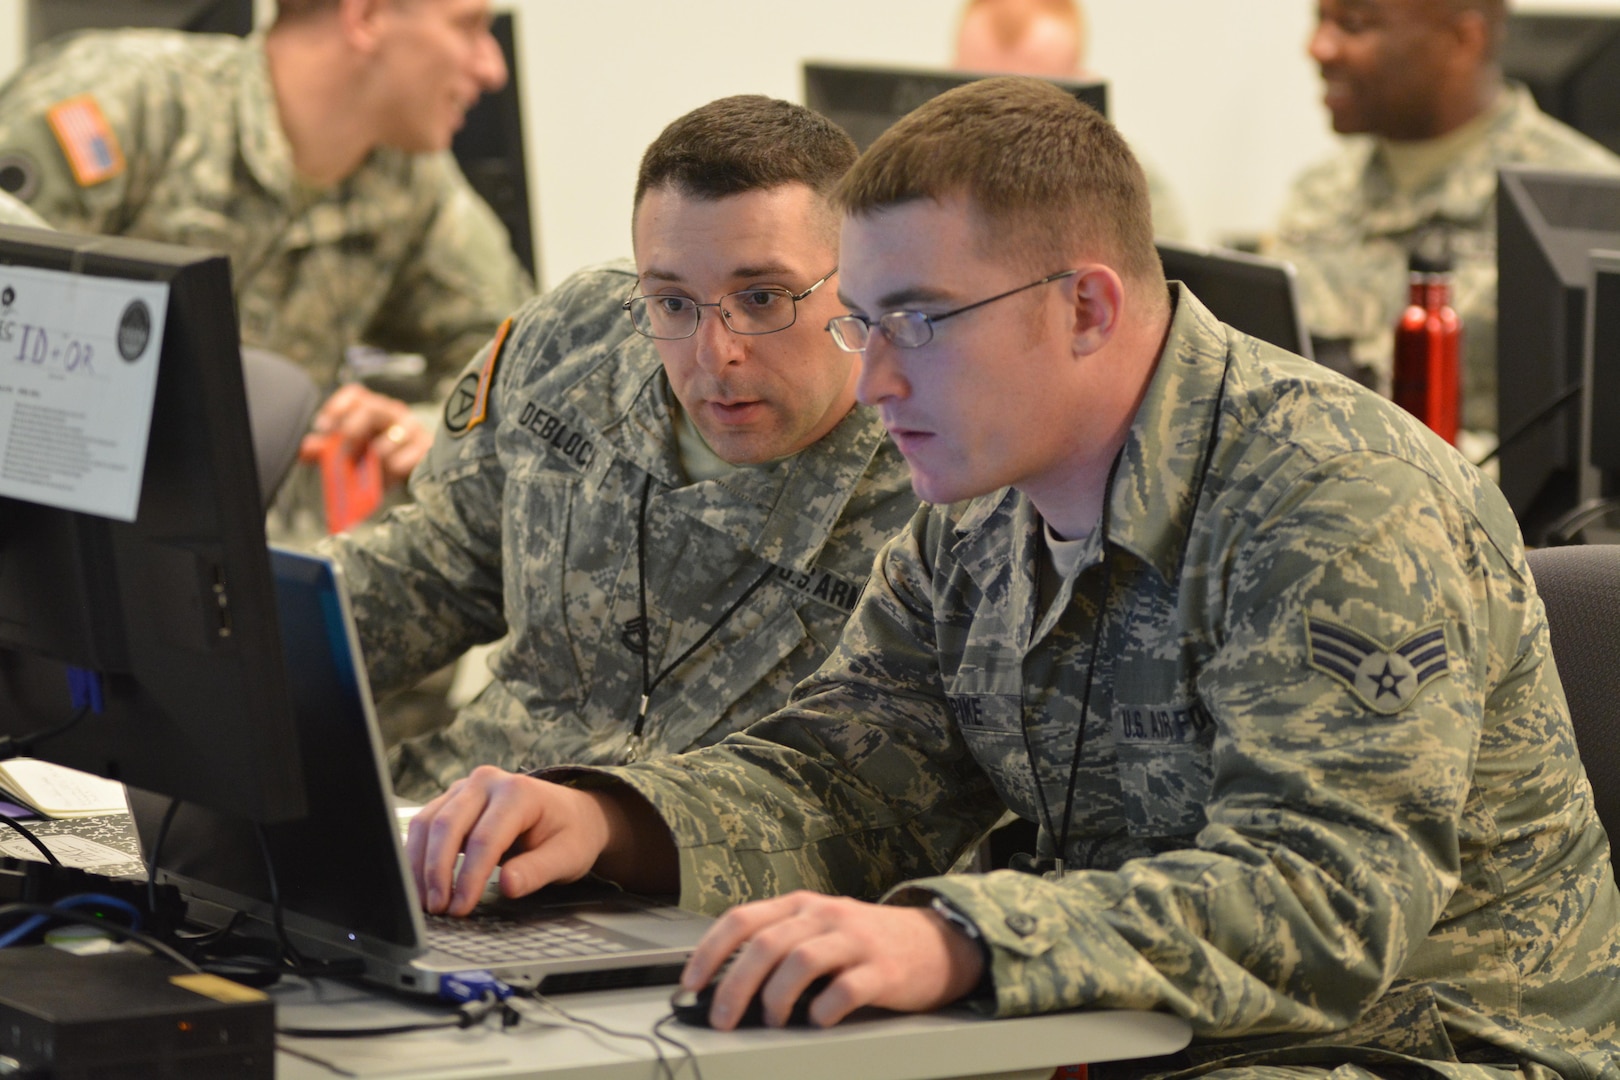 Sgt. 1st Class Michael Deblock, with the Vermont Army National Guard, discusses network settings with a fellow Red Cell team member during the 2014 Cyber Shield exercise at the National Guard Professional Education Center, at Camp Joseph T. Robinson, Arkansas. The Cyber Shield tested participants on a variety of real world cyber attack scenarios. As part of a continued commitment to cyber defense capabilities the first three of a planned 10 new cyber protection teams within the Army National Guard are planned to be activated within the next three fiscal years. The first team will spread between Michigan, Indiana and Ohio with the second and third teams to be located in Georgia and California.